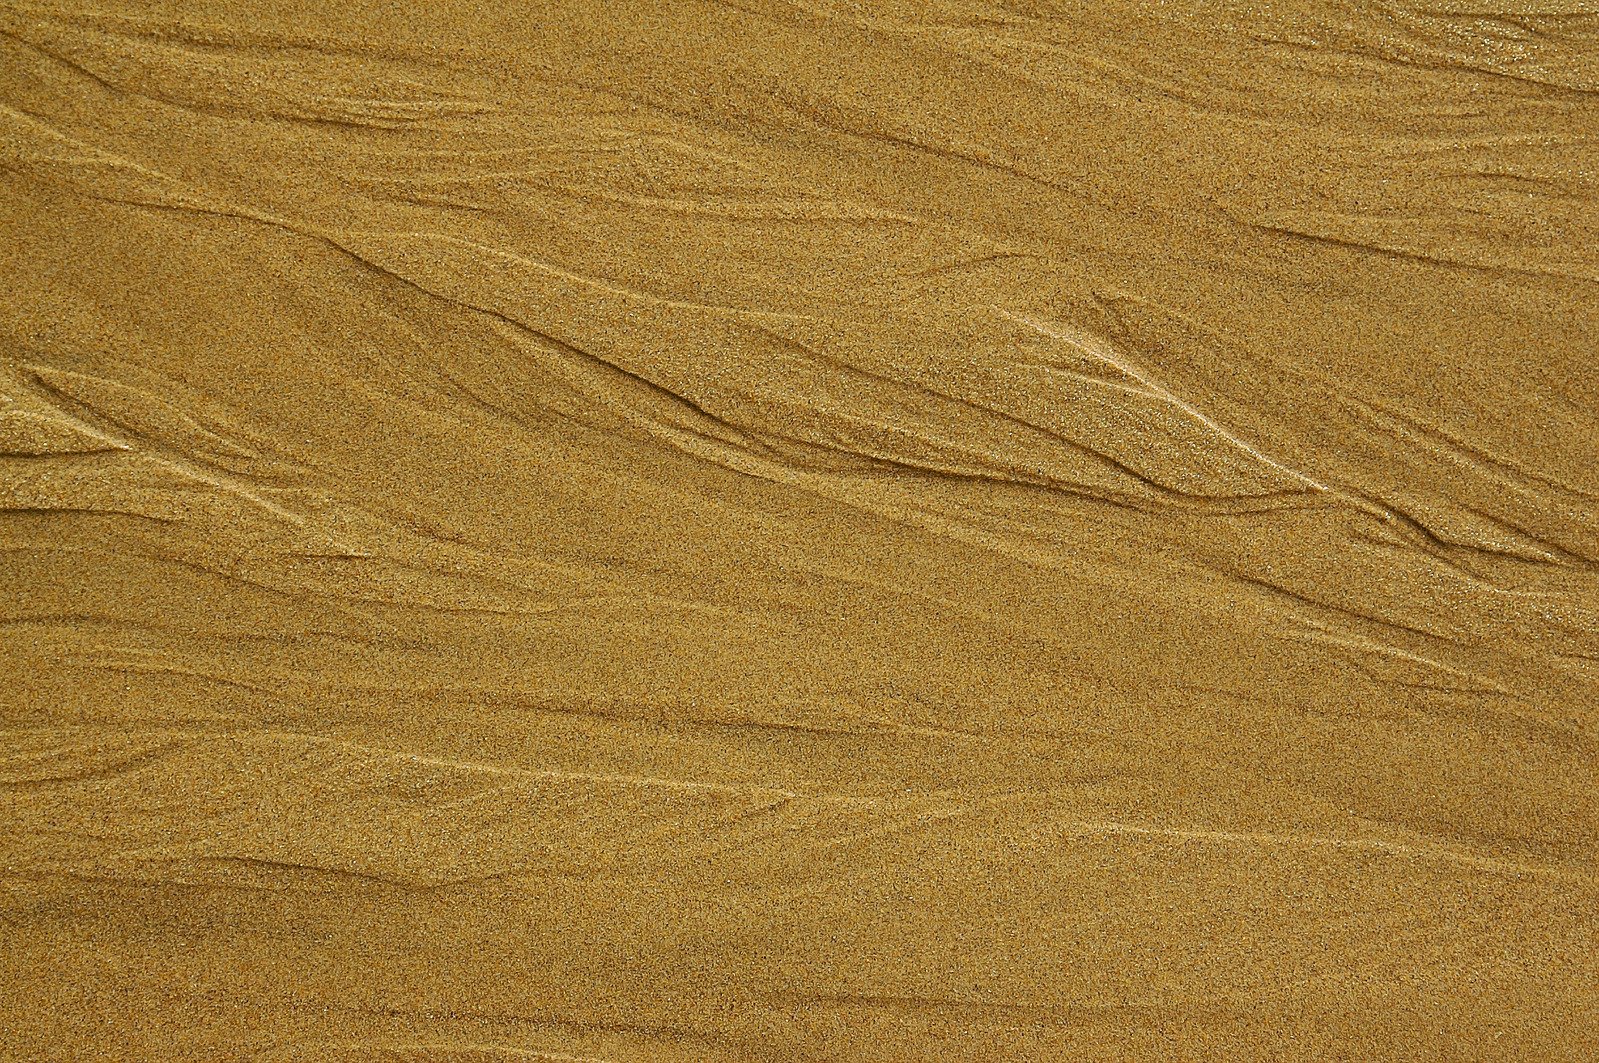 sand flowing through the middle of a sandy beach